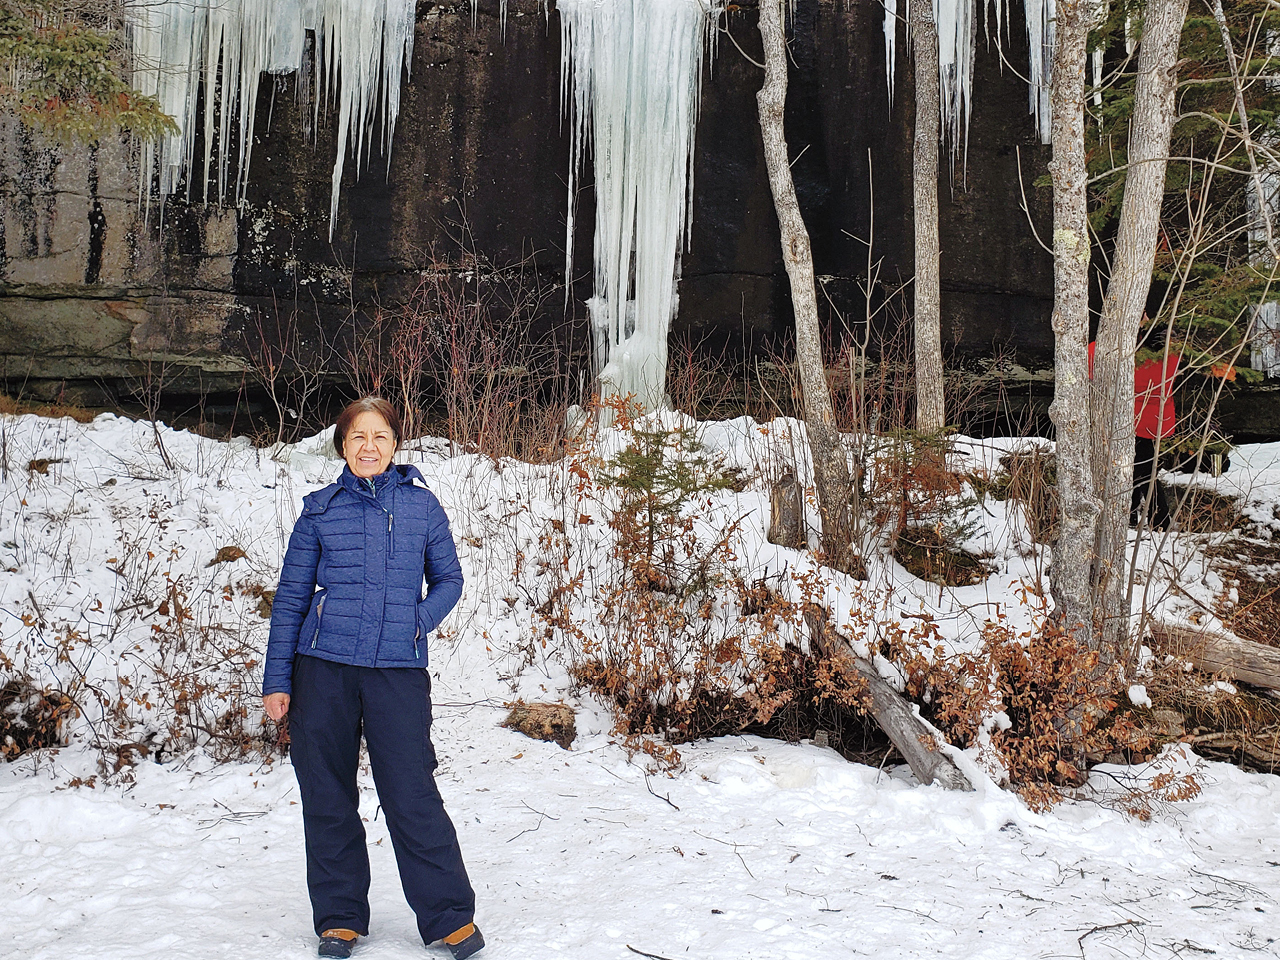 The author stands in front of the long icicles of a frozen waterfall